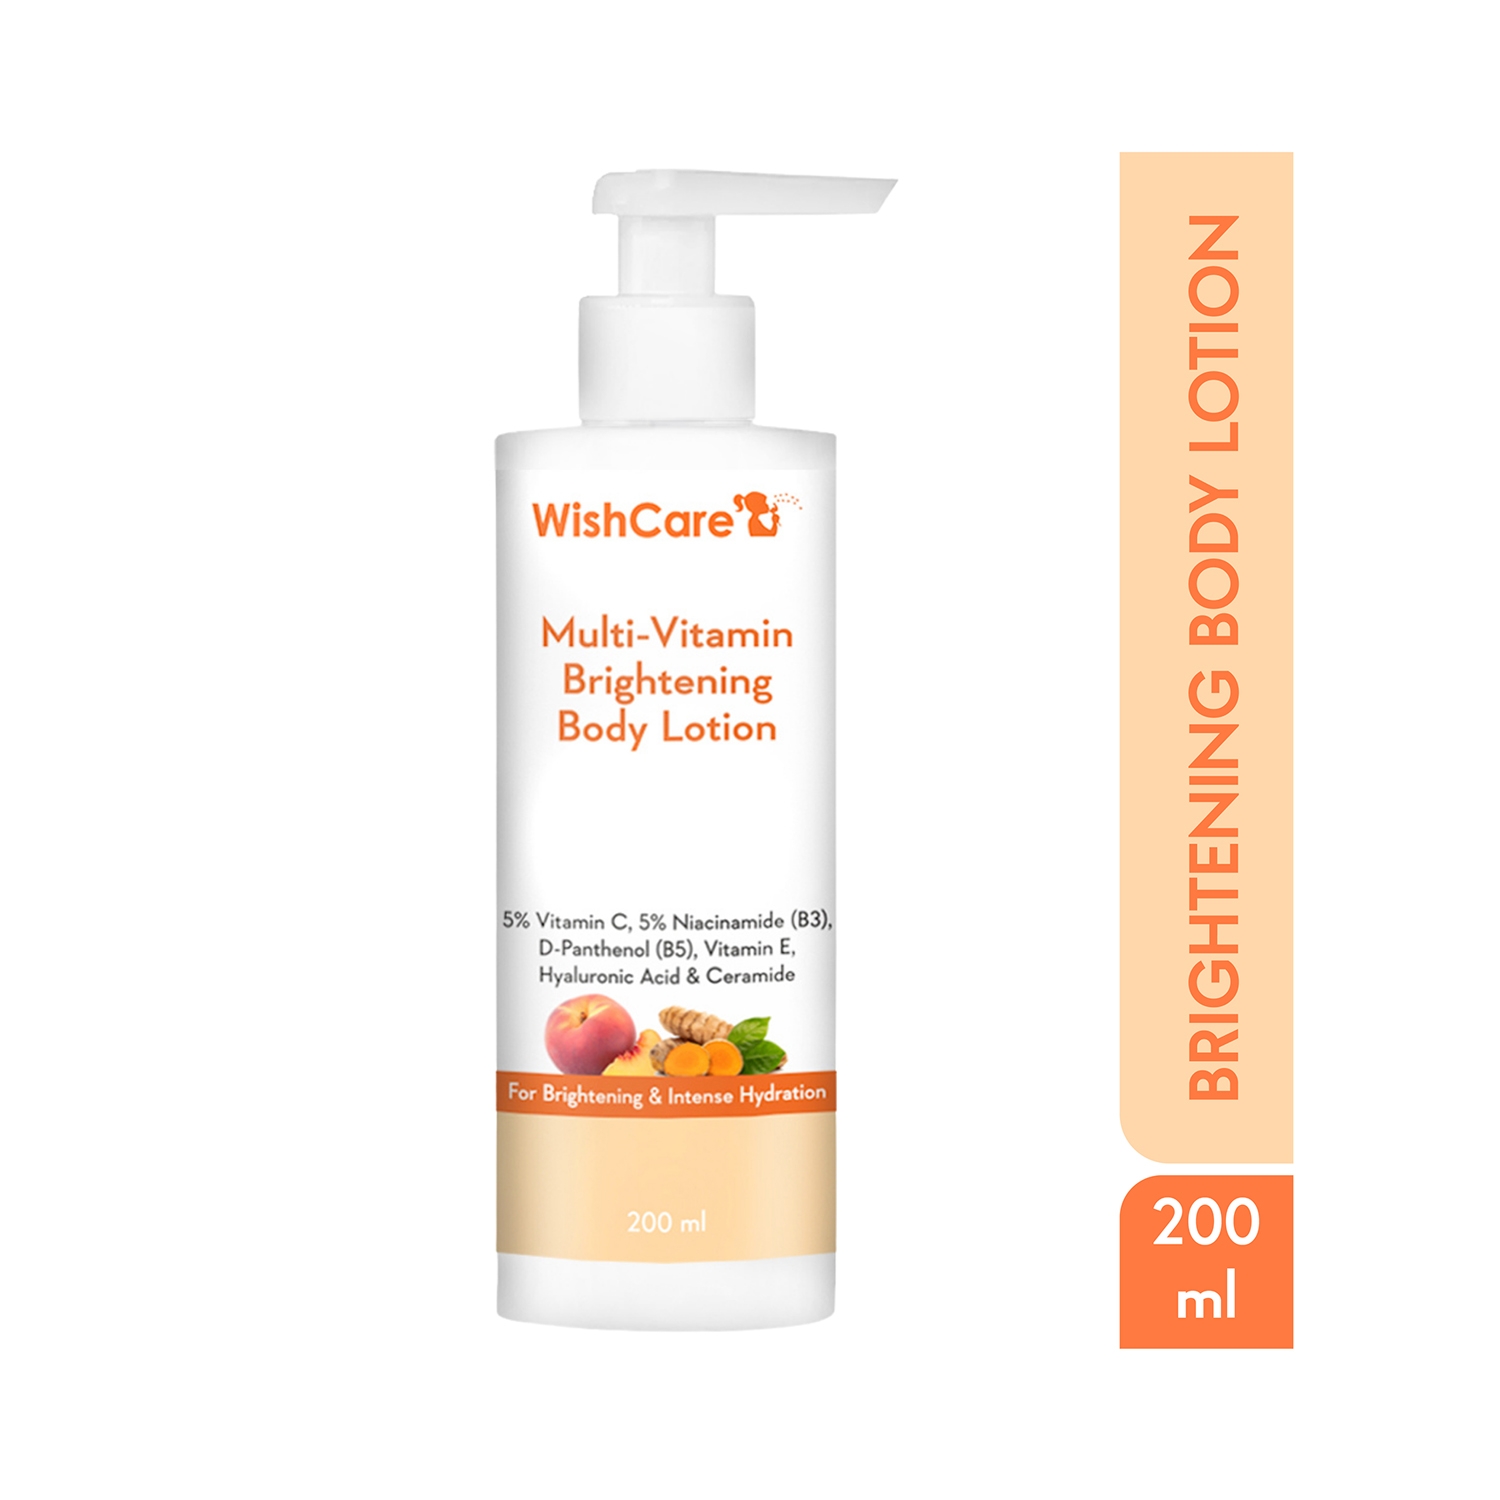 Wishcare Invisible Gel Sunscreen SPF50+ PA++++ - Broad Spectrum Protection  With No White Cast (50g)